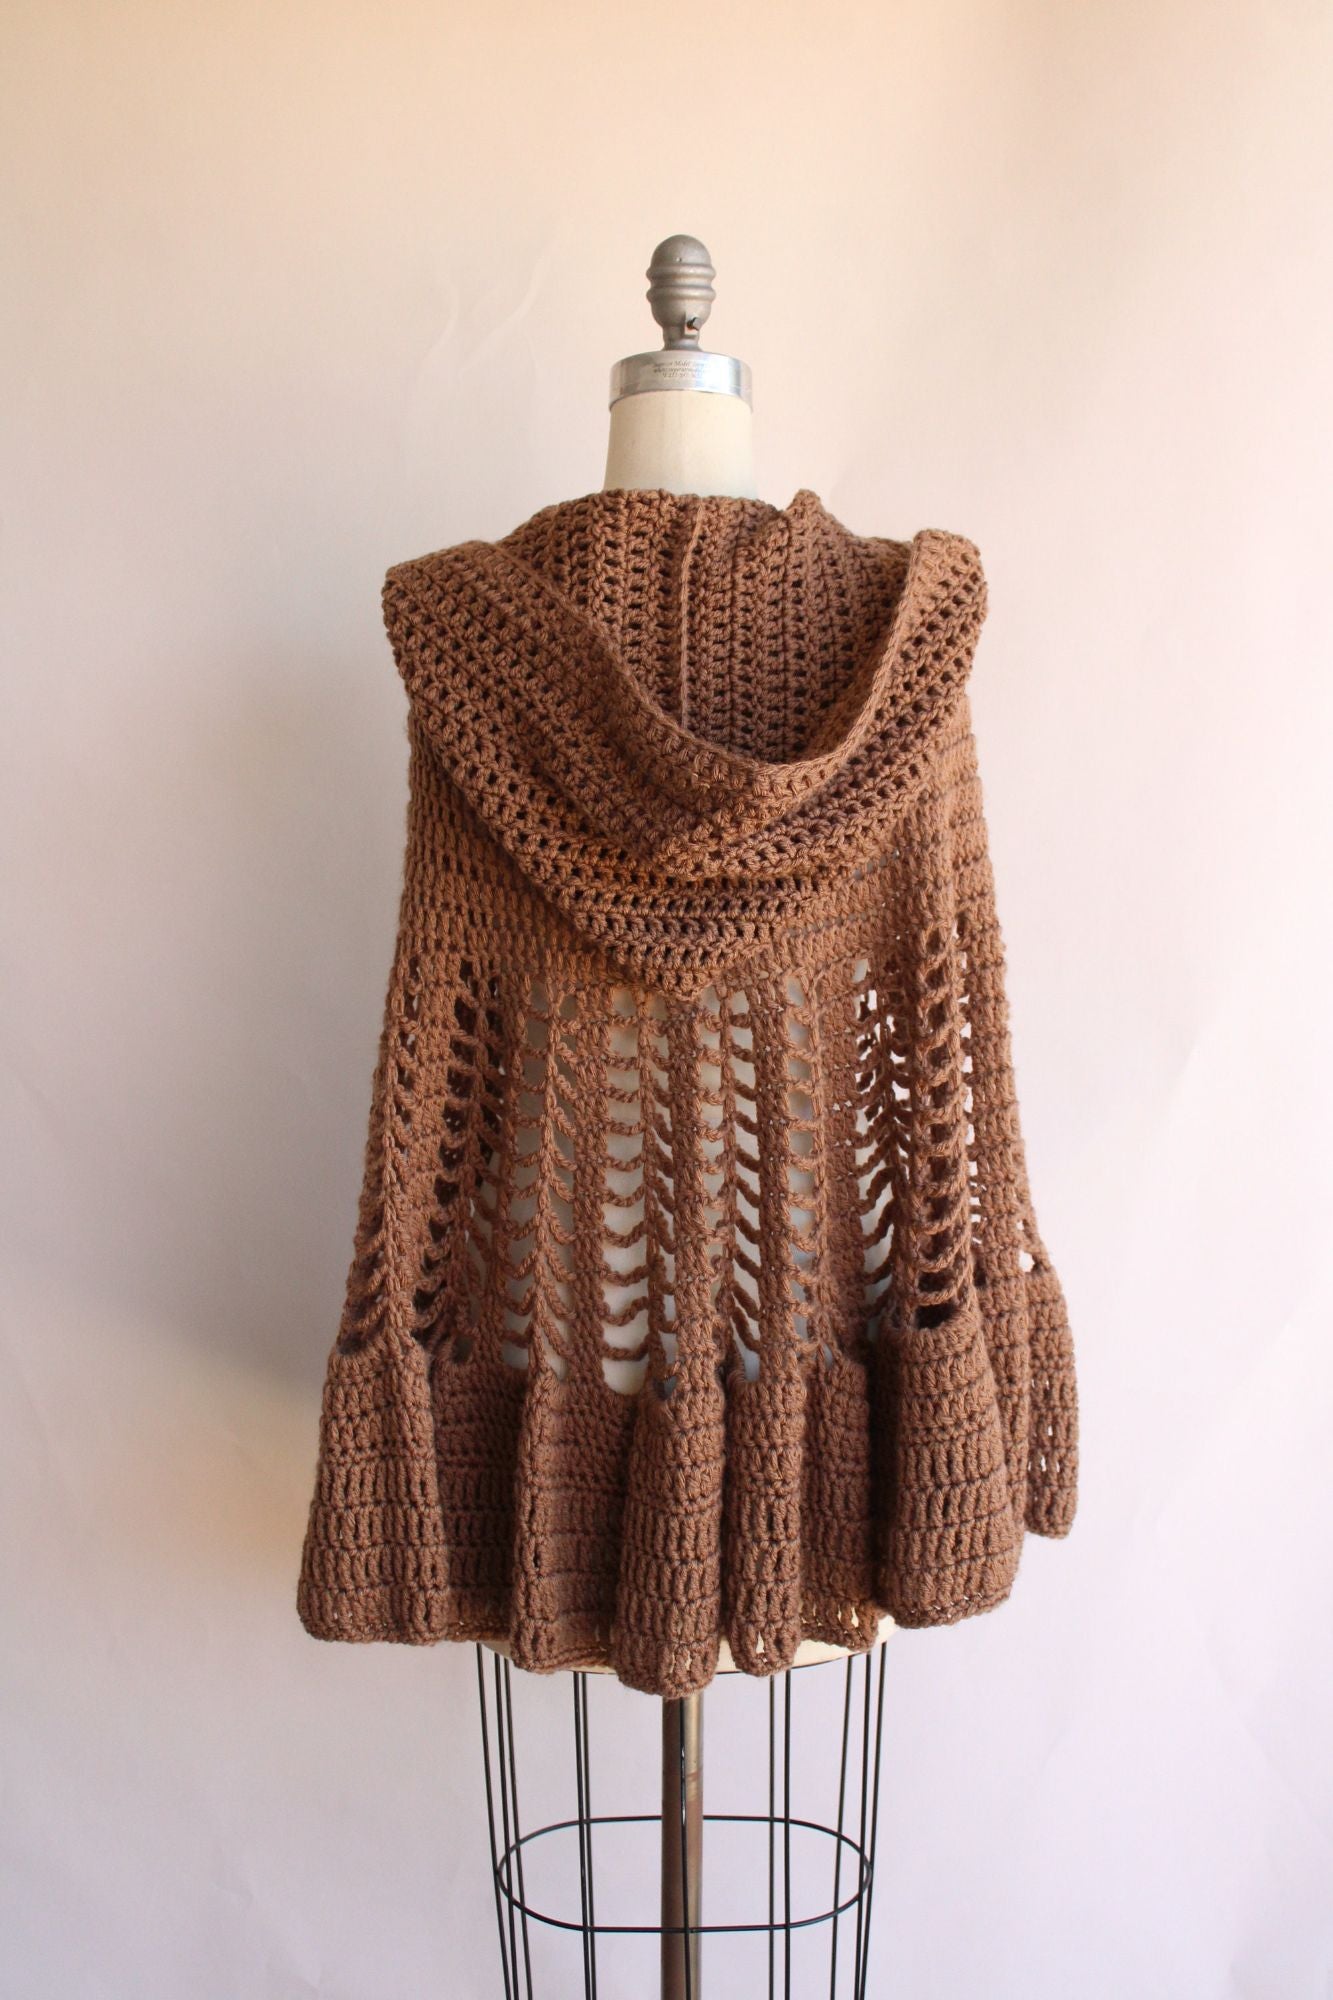 Vintage 1960s 1970s Poncho with Hood in a Brown Knit with Drawstring Tie